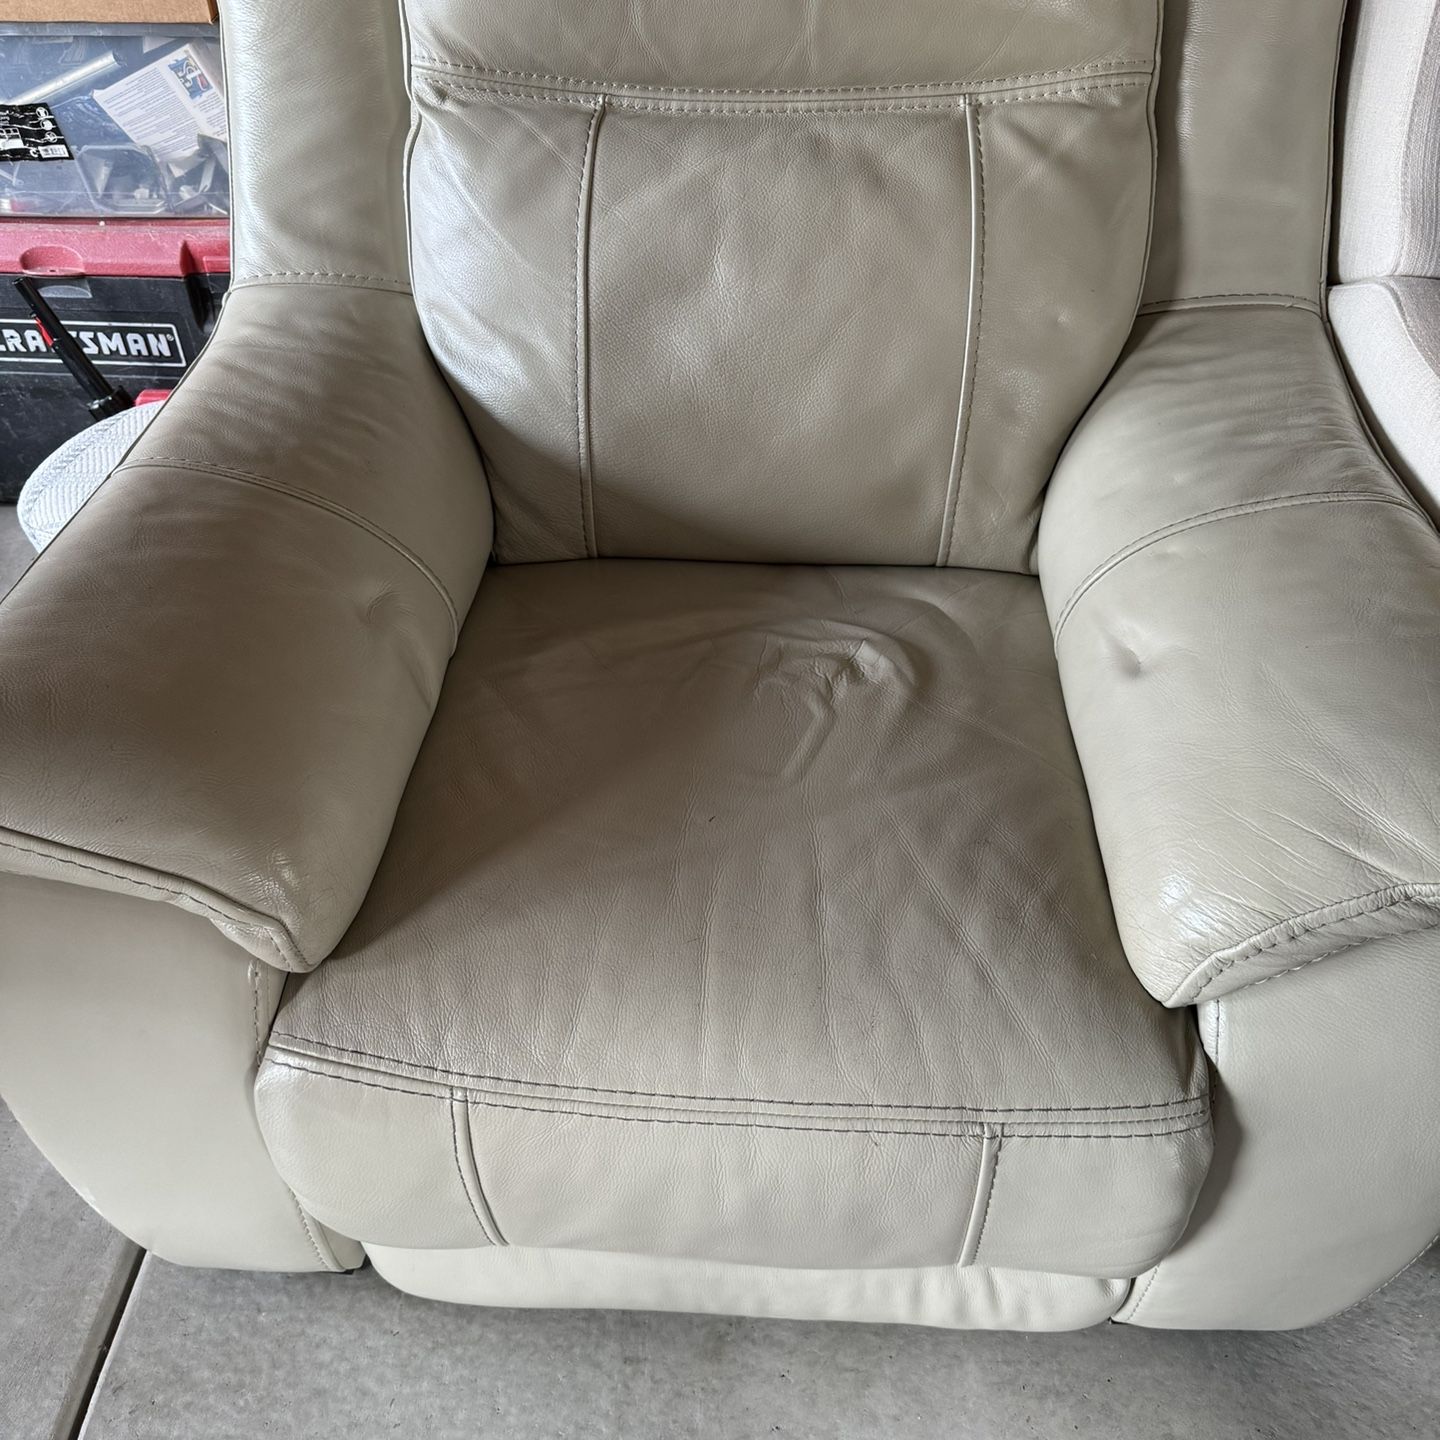 Used couch and recliner 